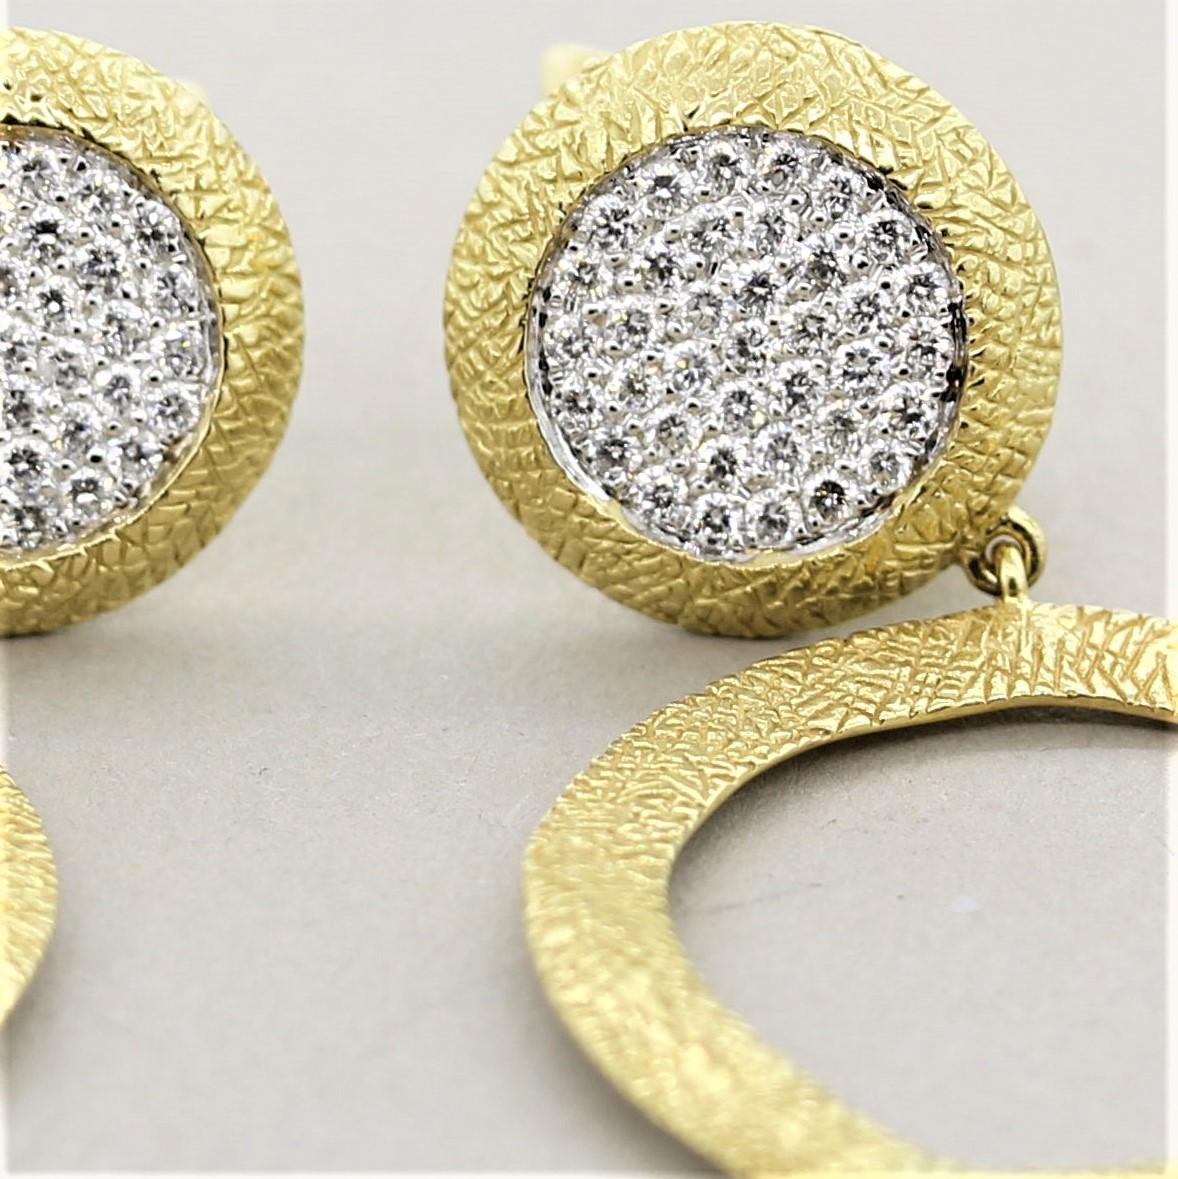 A lovely pair of hand-sculpted gold earrings which feature 0.70 carats of bright white pave set round brilliant cut diamonds. Below the diamonds is a gold hoop drop which is hand sculpted giving the gold a unique design and texture which is also